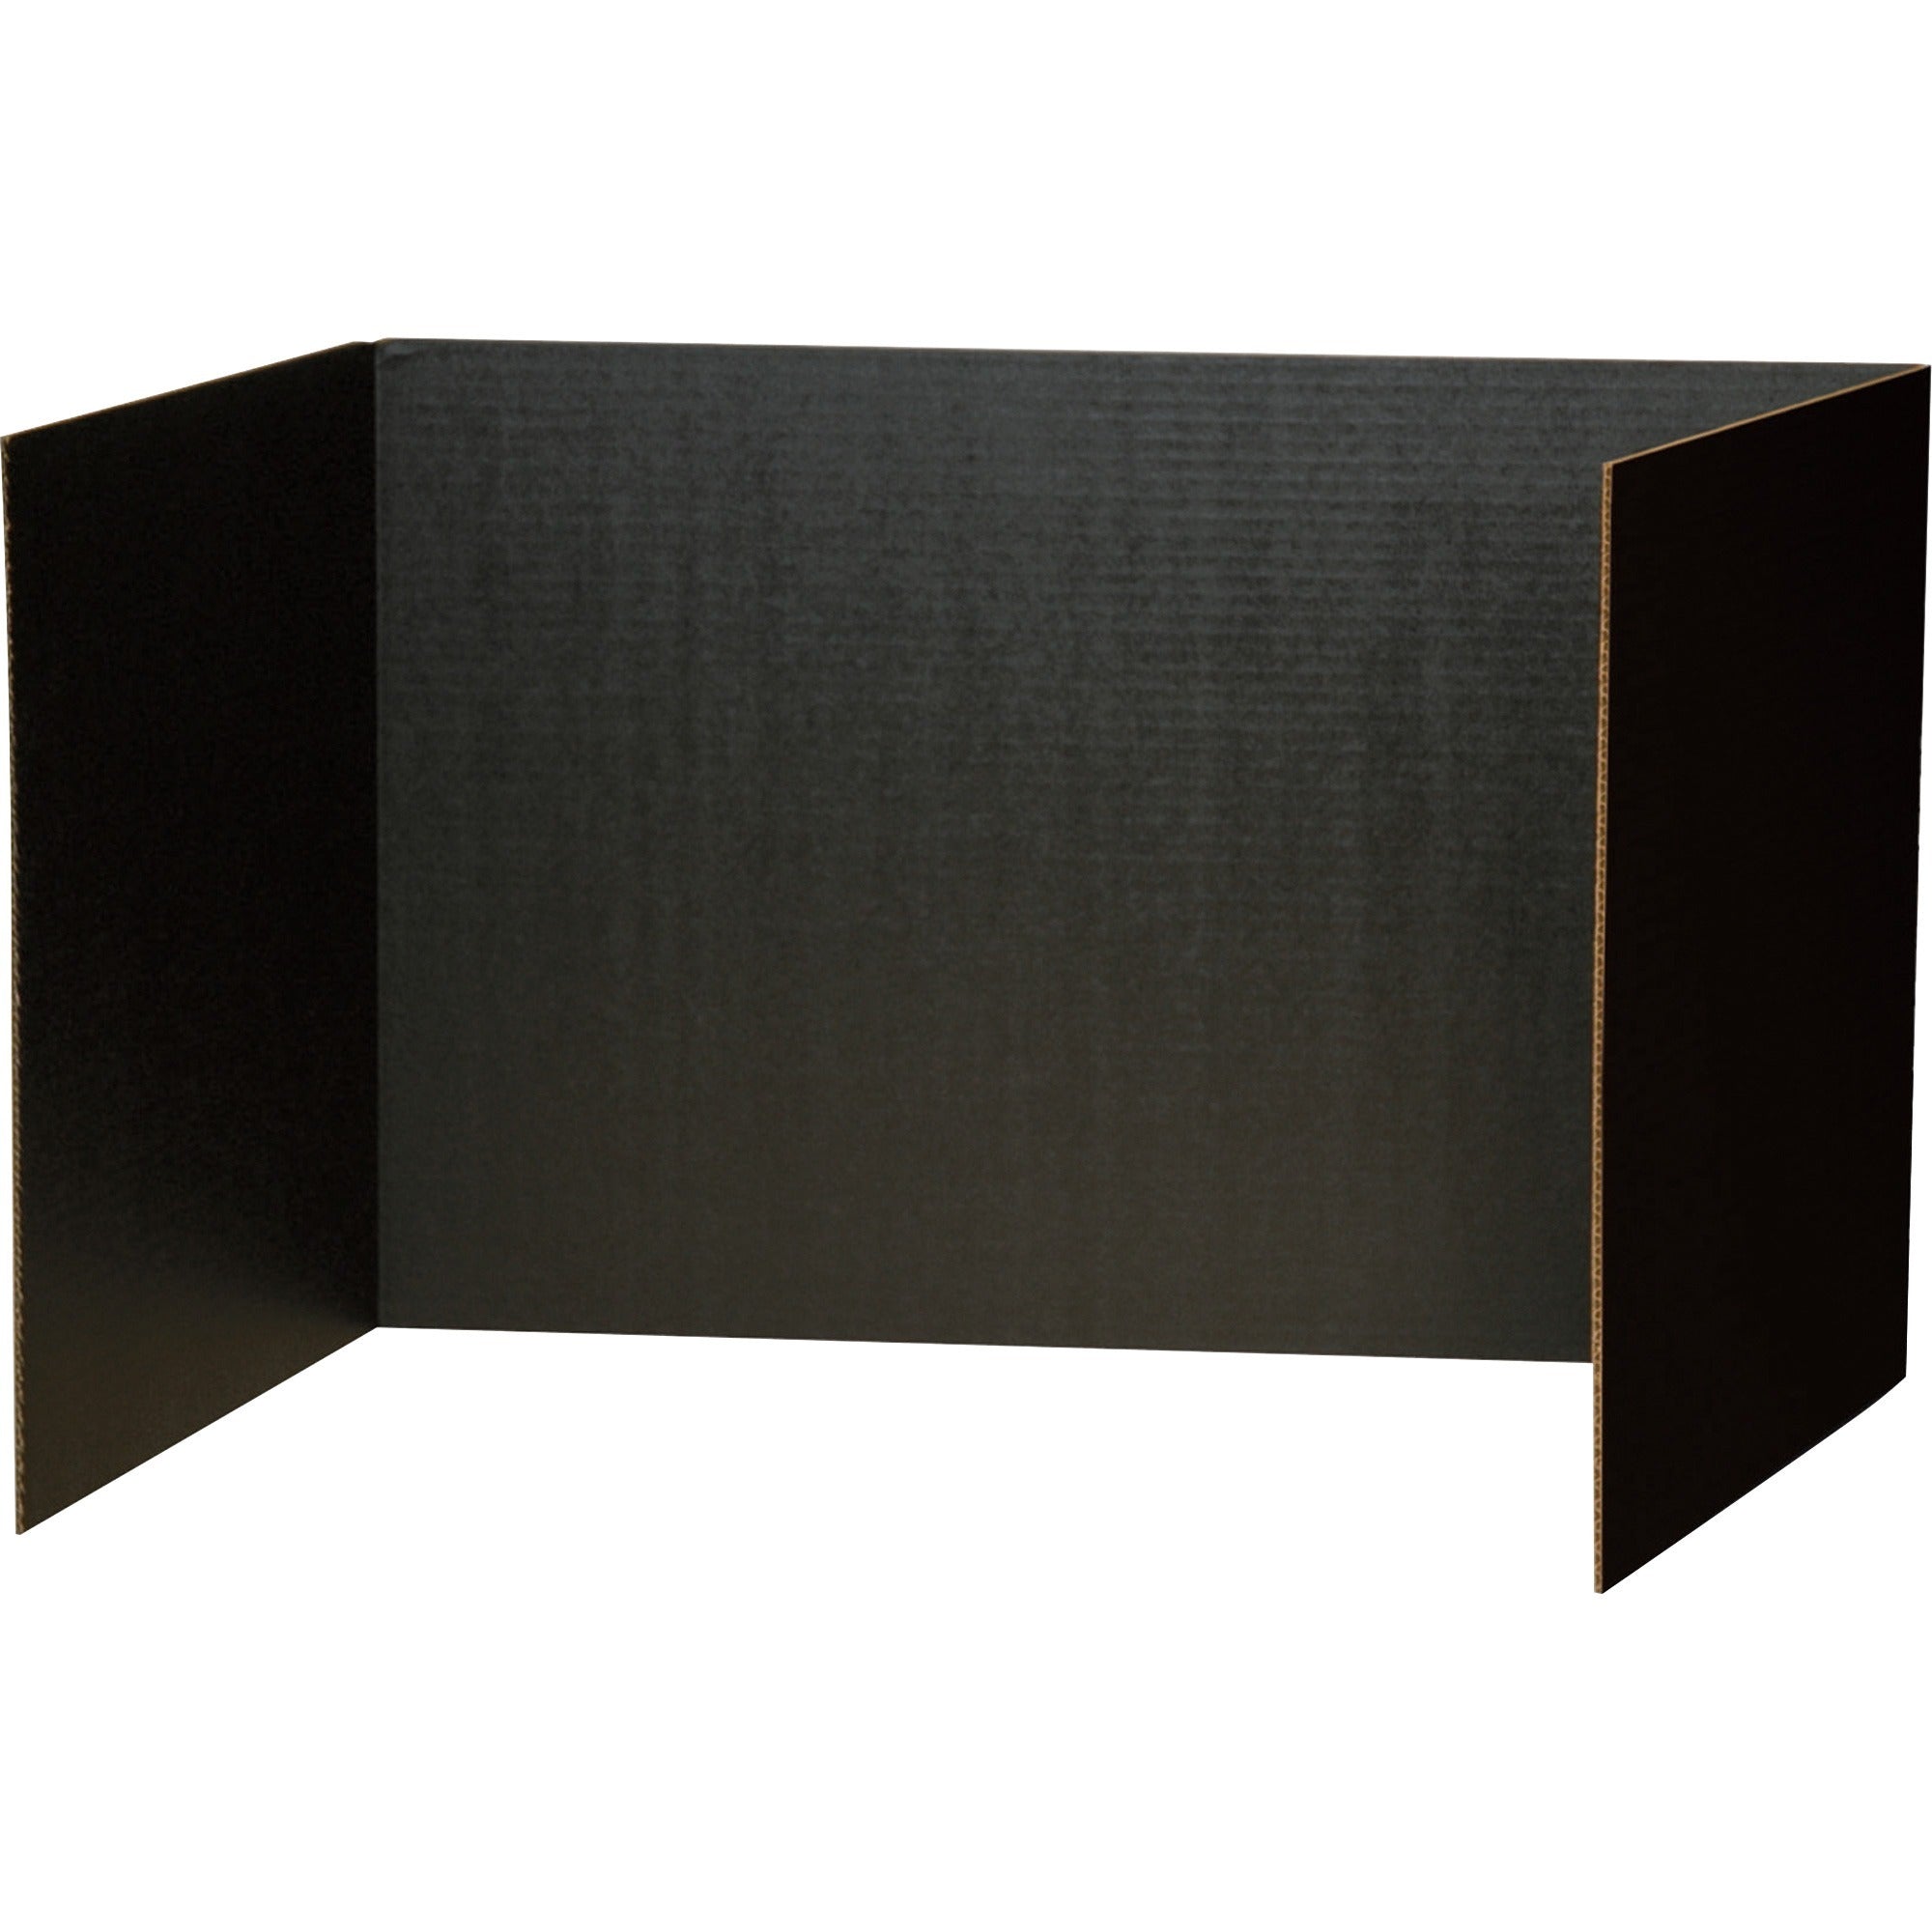 Pacon Privacy Boards - 48"W x 16"H - 4 Boards/Pack - Black - 